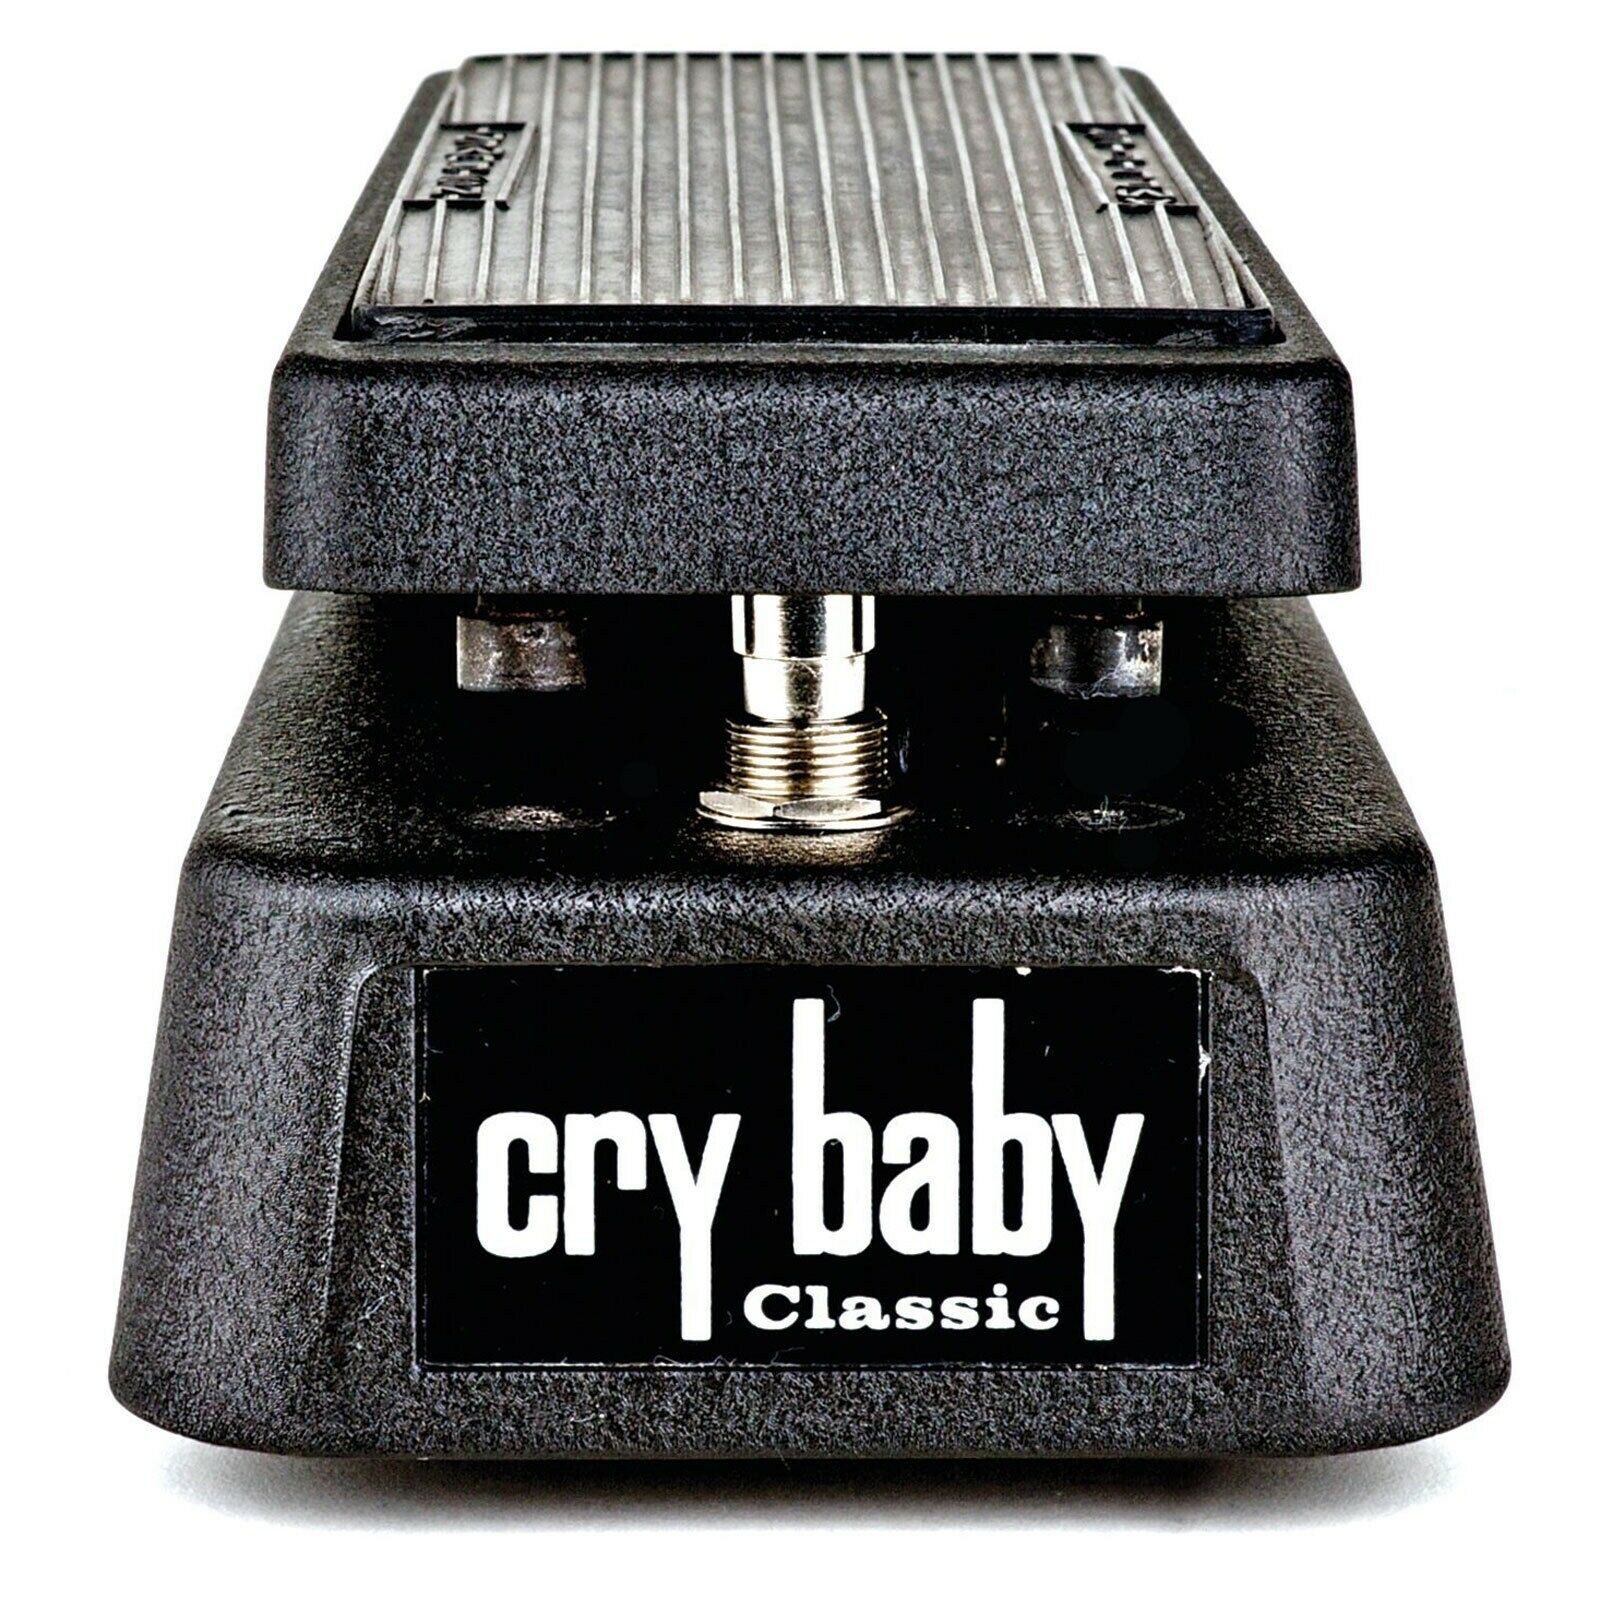 Dunlop Gcb95f Cry Baby Classic Fasel Inductor Wah Pedal